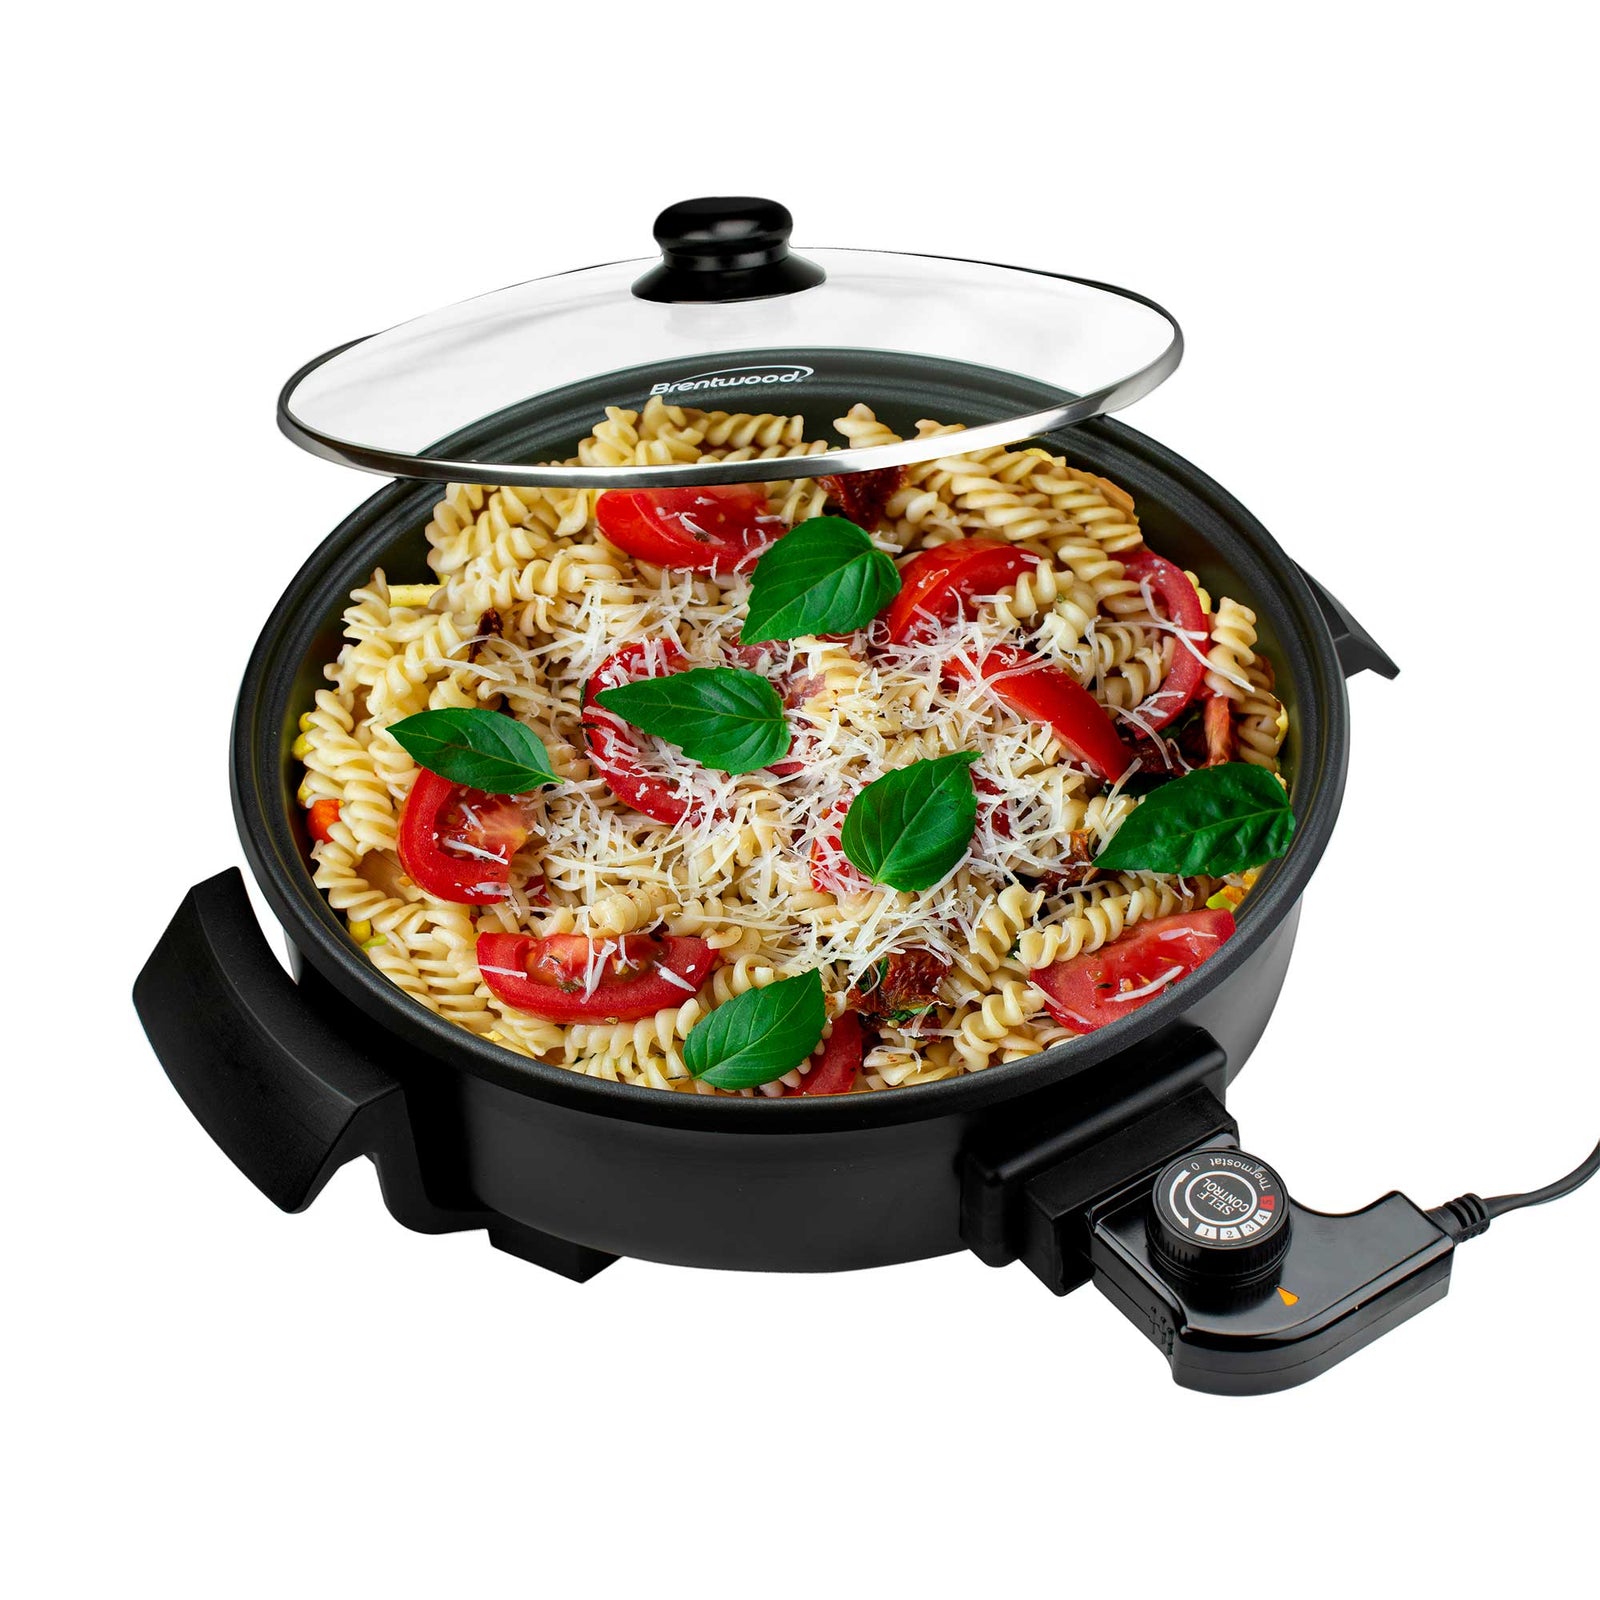 Brentwood Appliances Electric Skillet with Glass Lid & Reviews